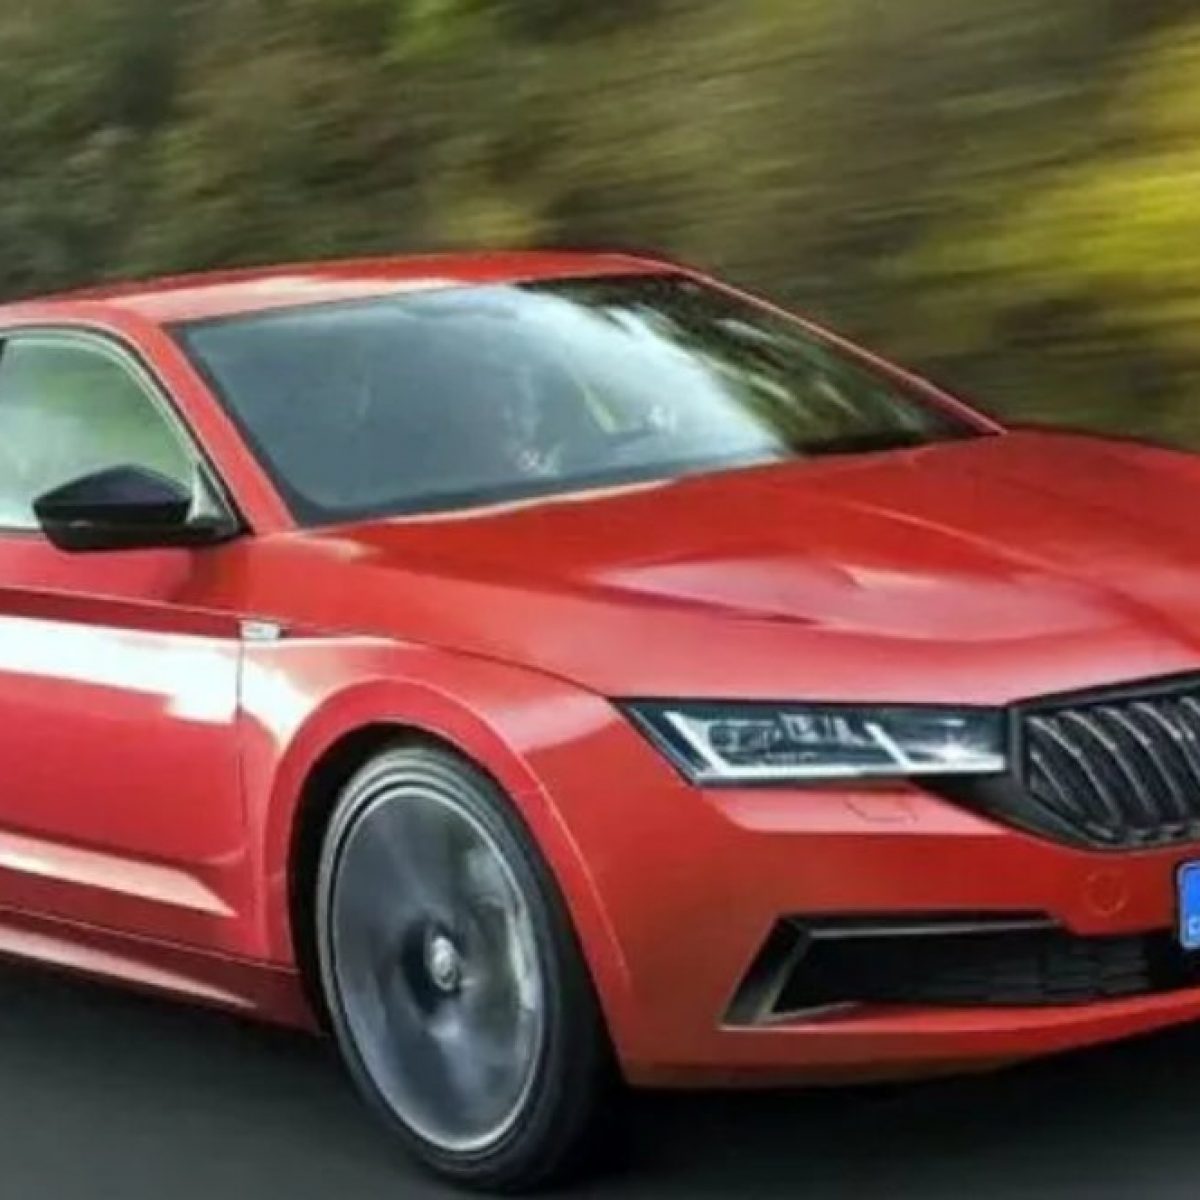 Next Gen Skoda Octavia To Launch In India By End 2020